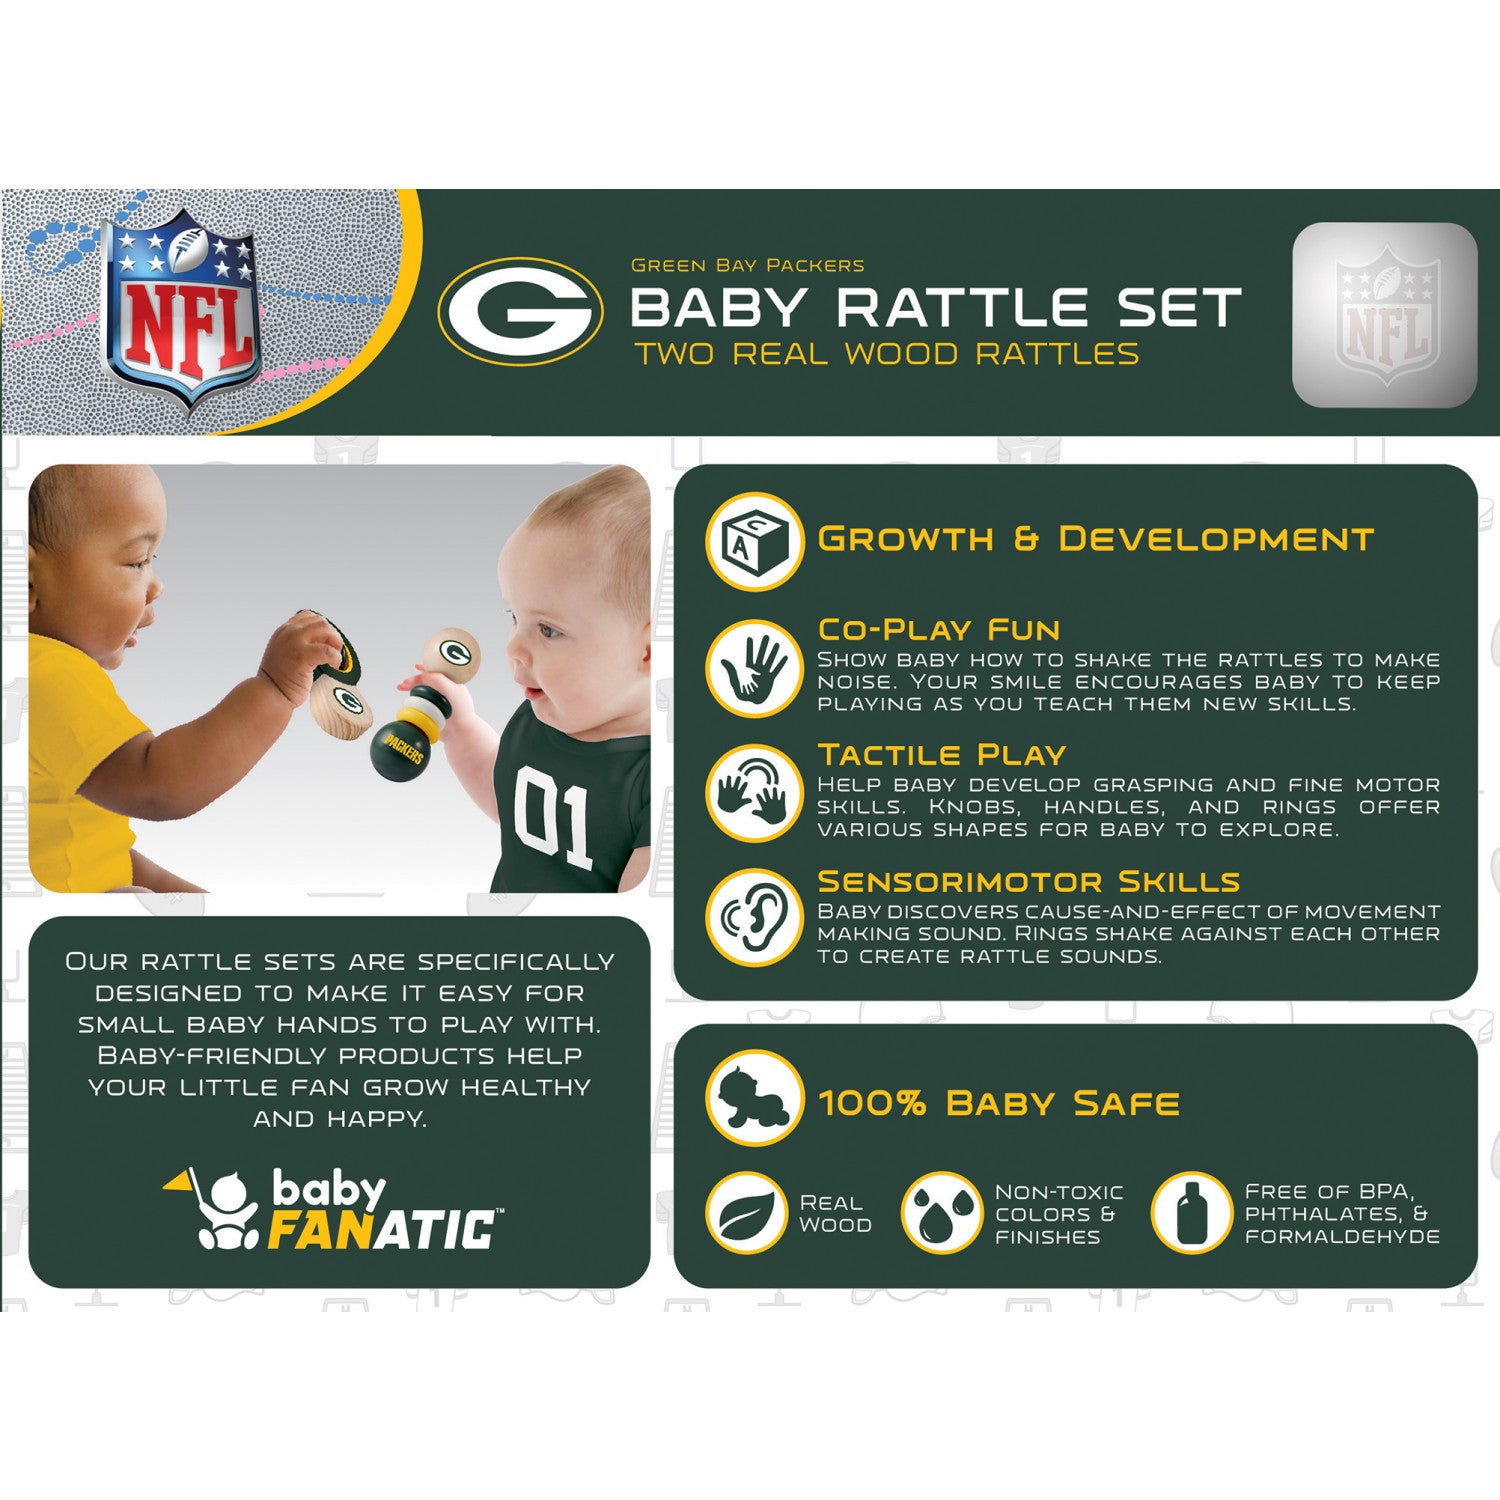 Green Bay Packers - Baby Rattles 2-Pack